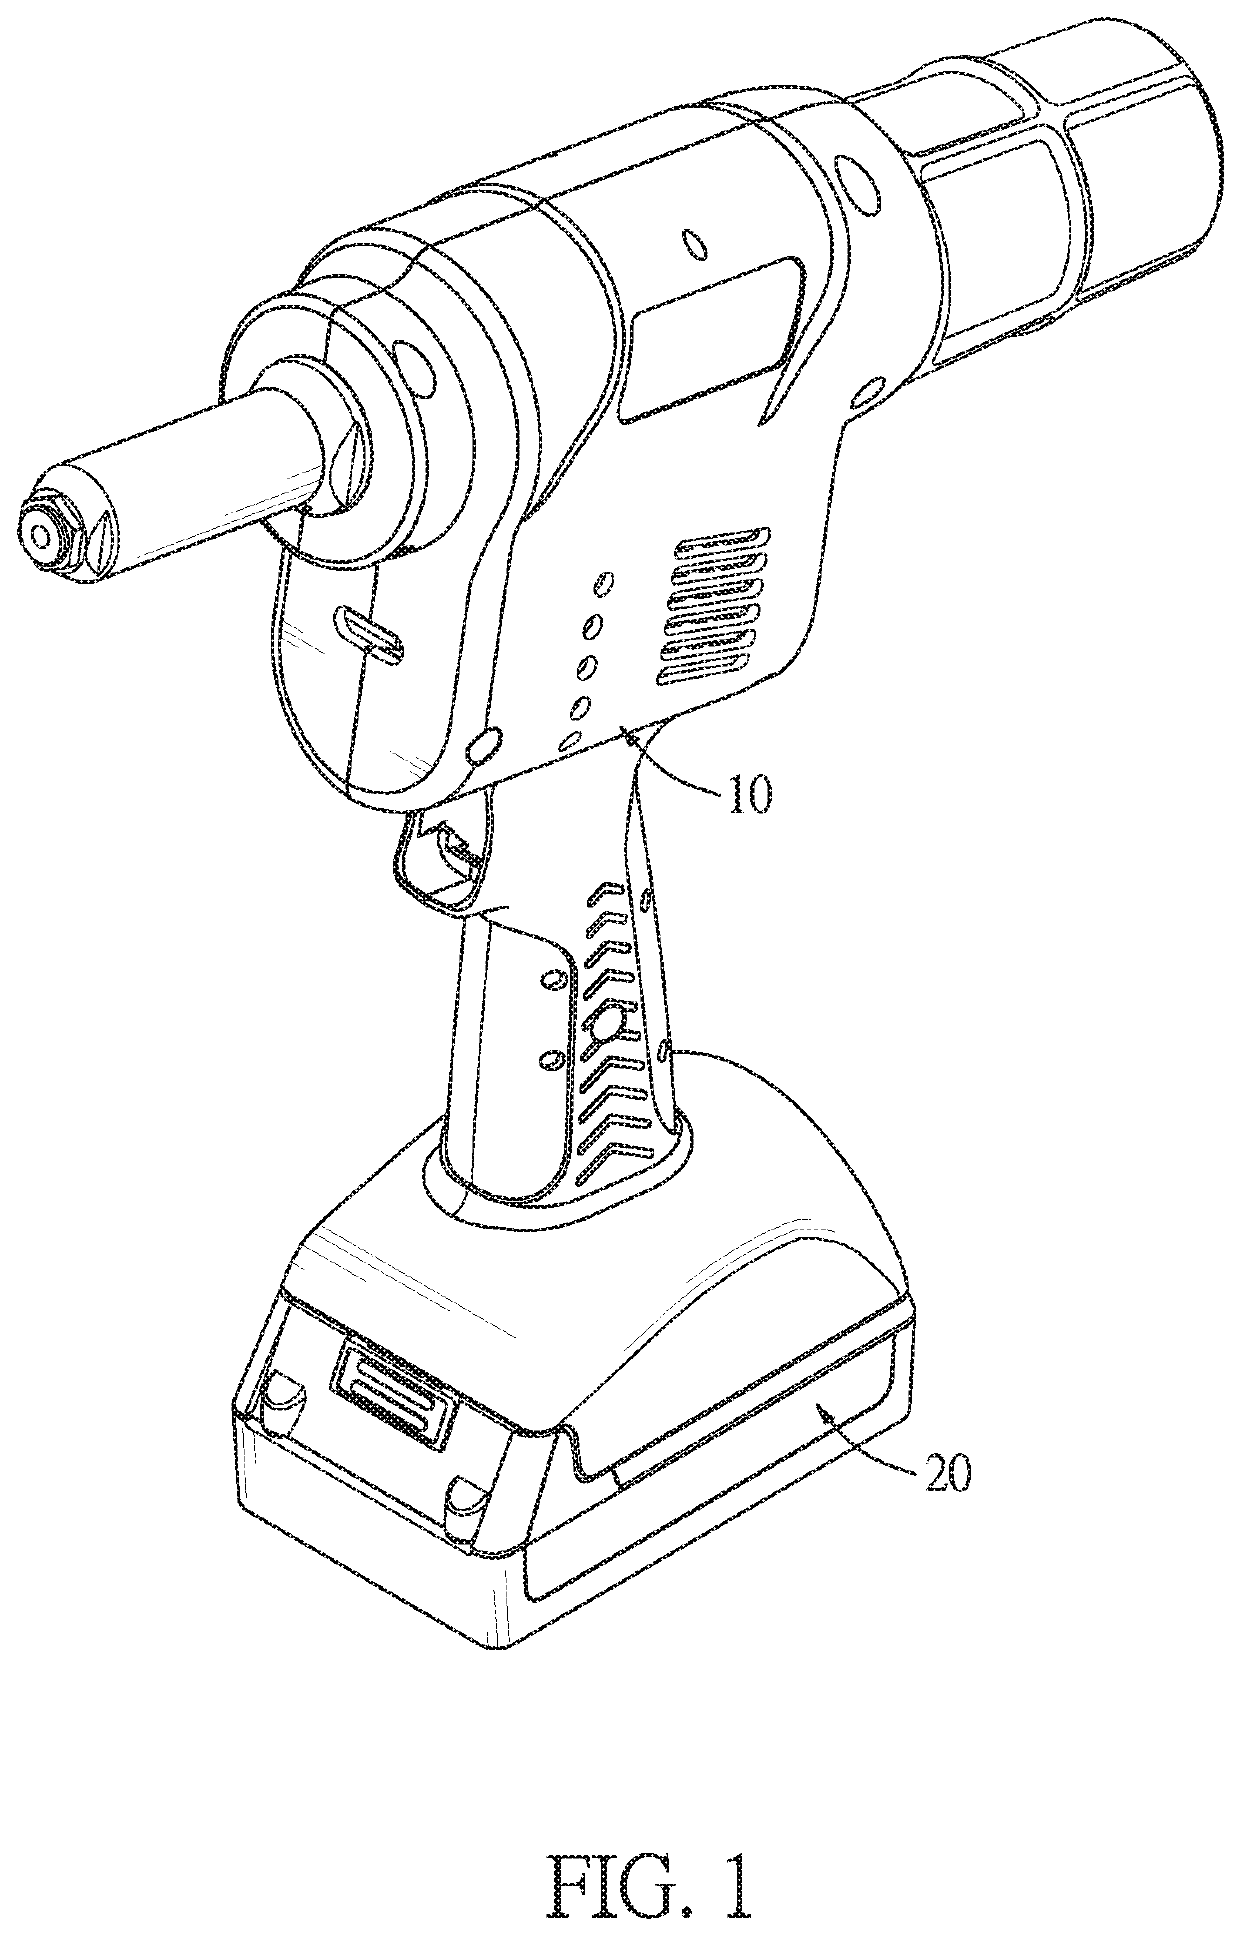 Assembling structure for a conductive plate of a handheld power tool